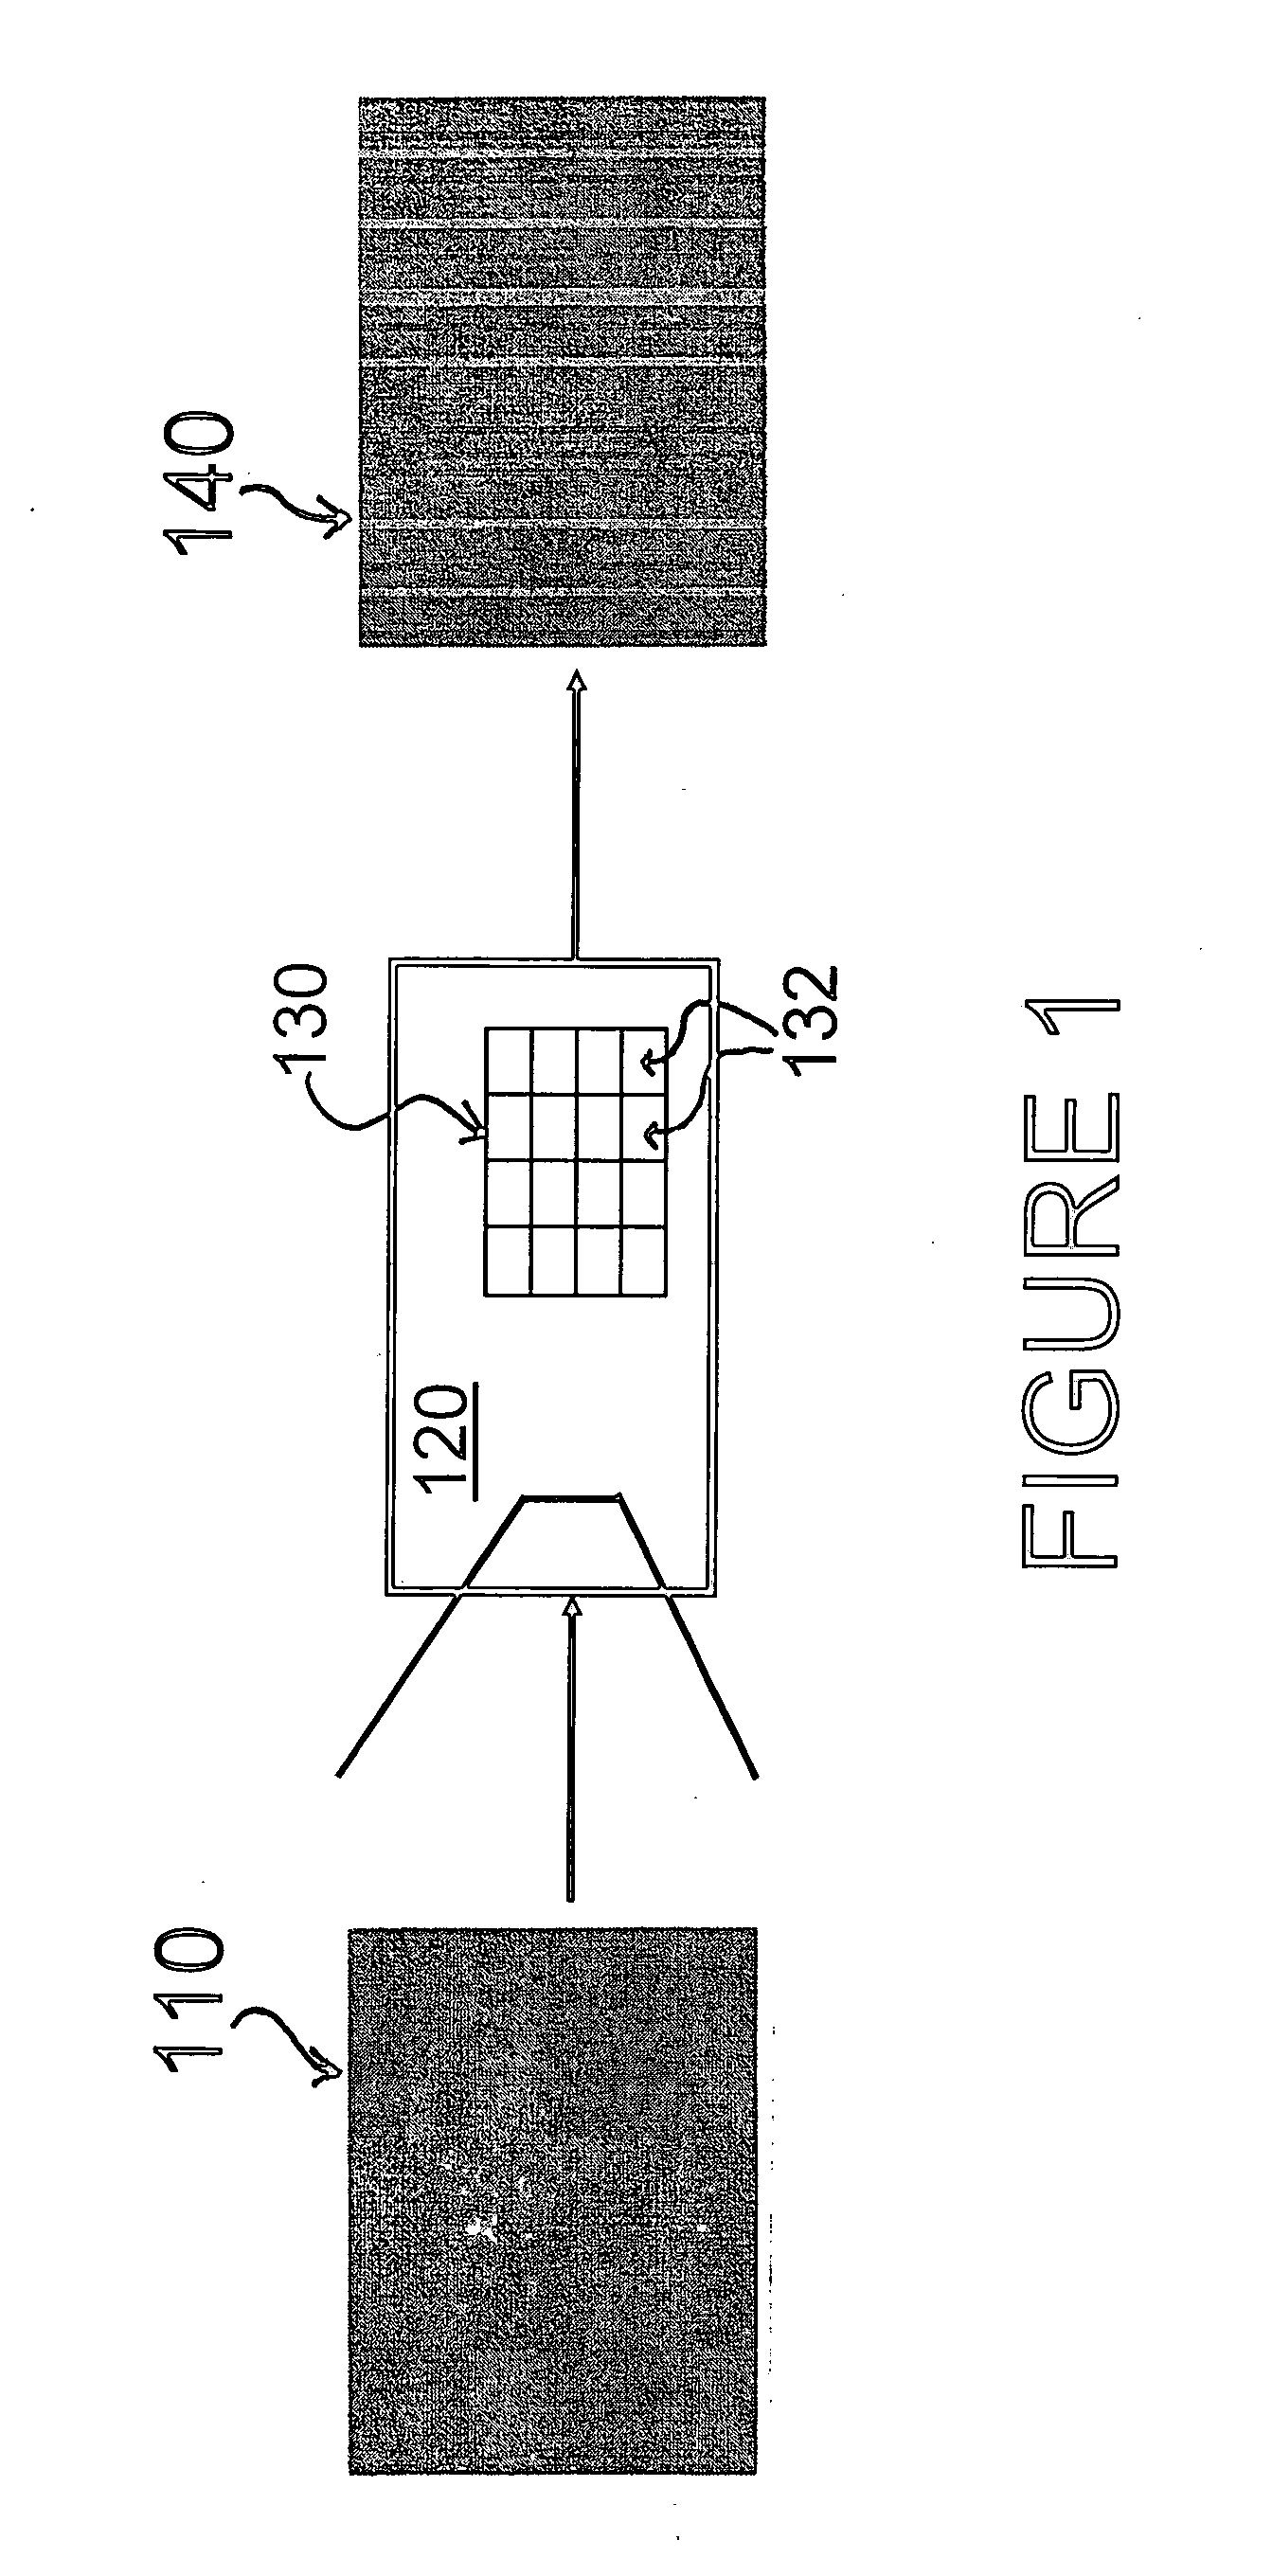 Method and apparatus providing imager noise reduction using parallel input arithmetic mean modules